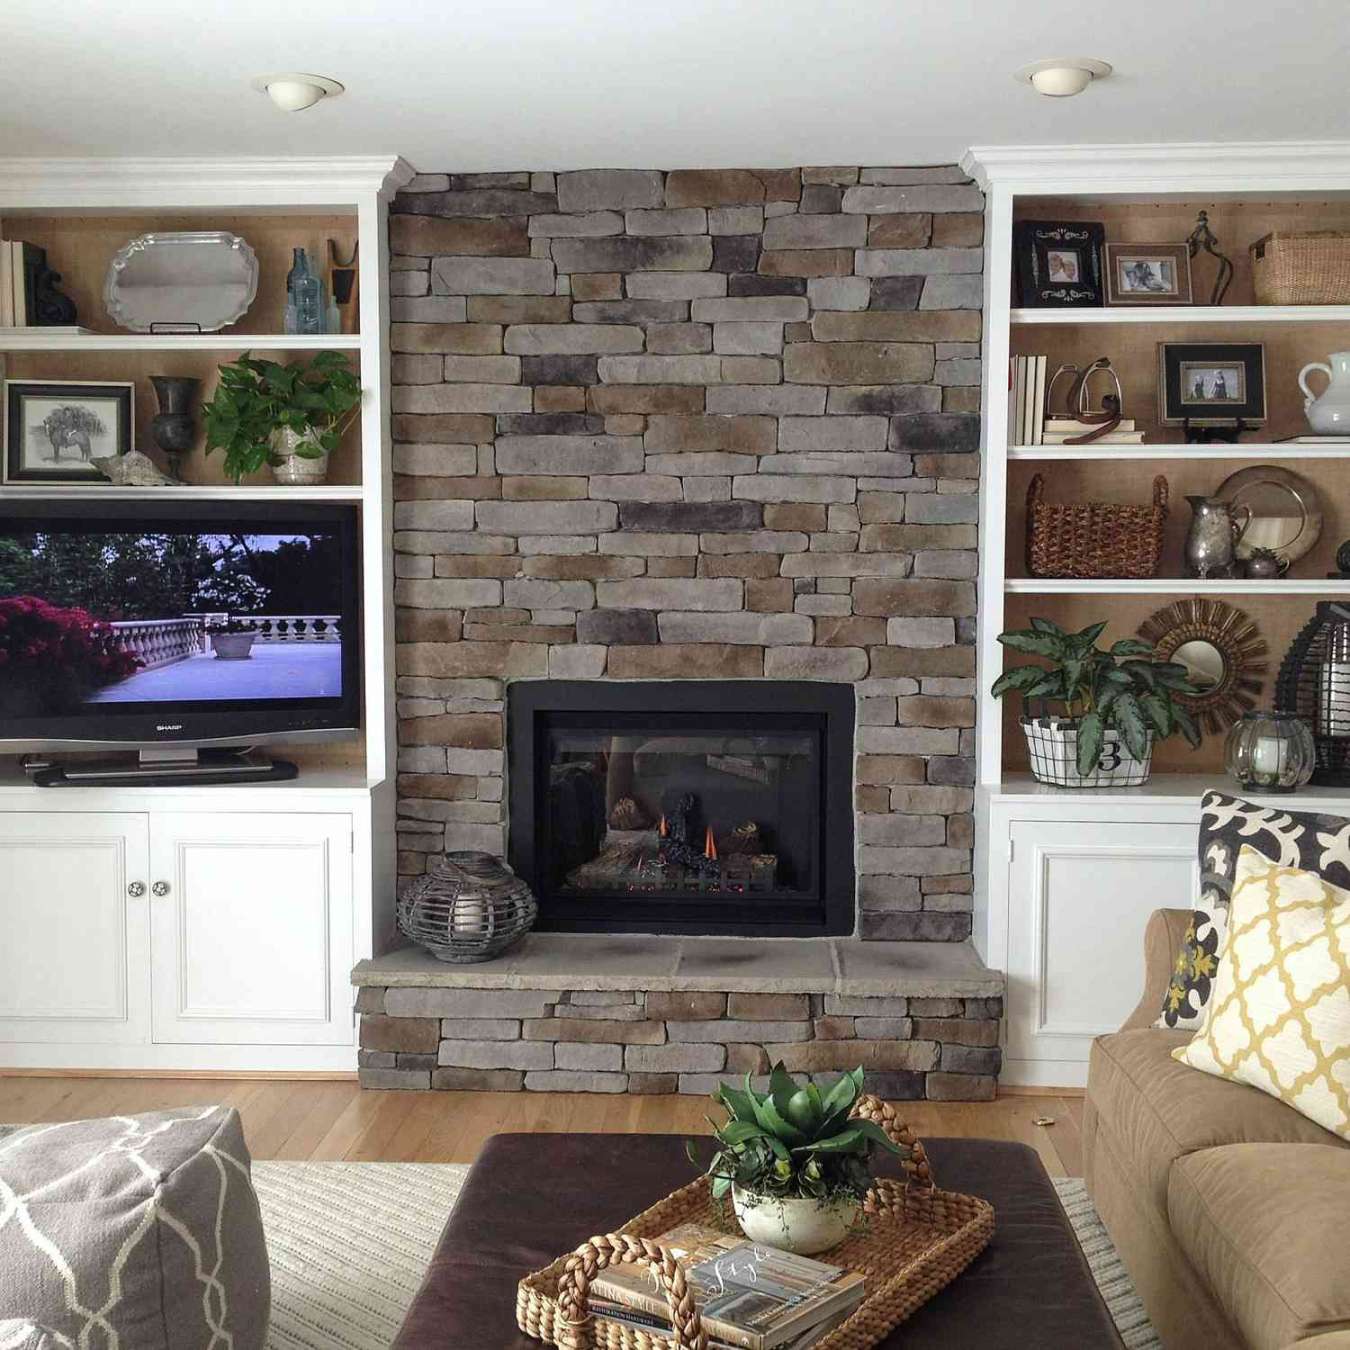 How to Create the Stacked Stone Fireplace Look on a Budget